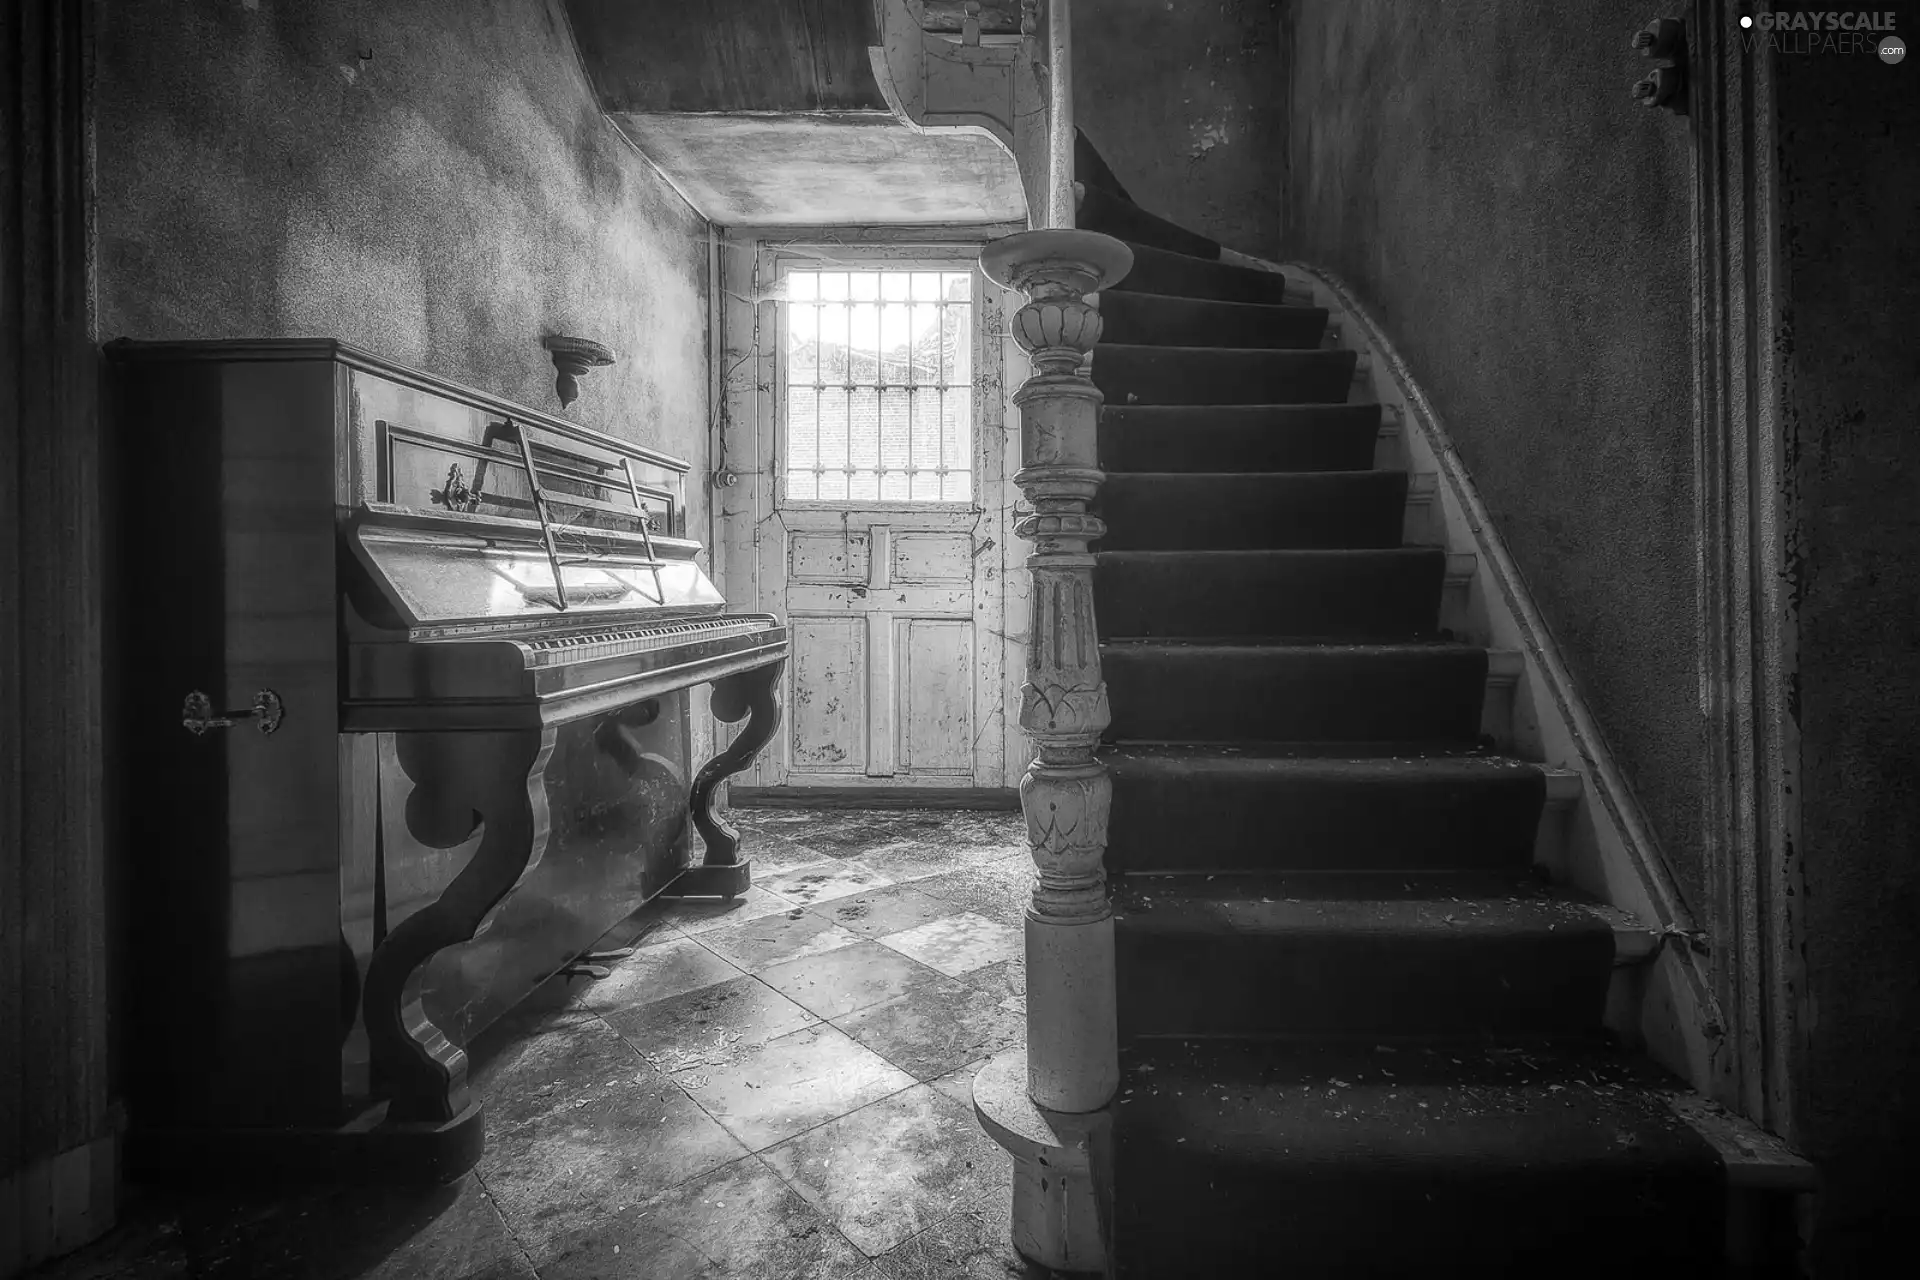 piano, Stairs, Staircase, Doors, Uncared